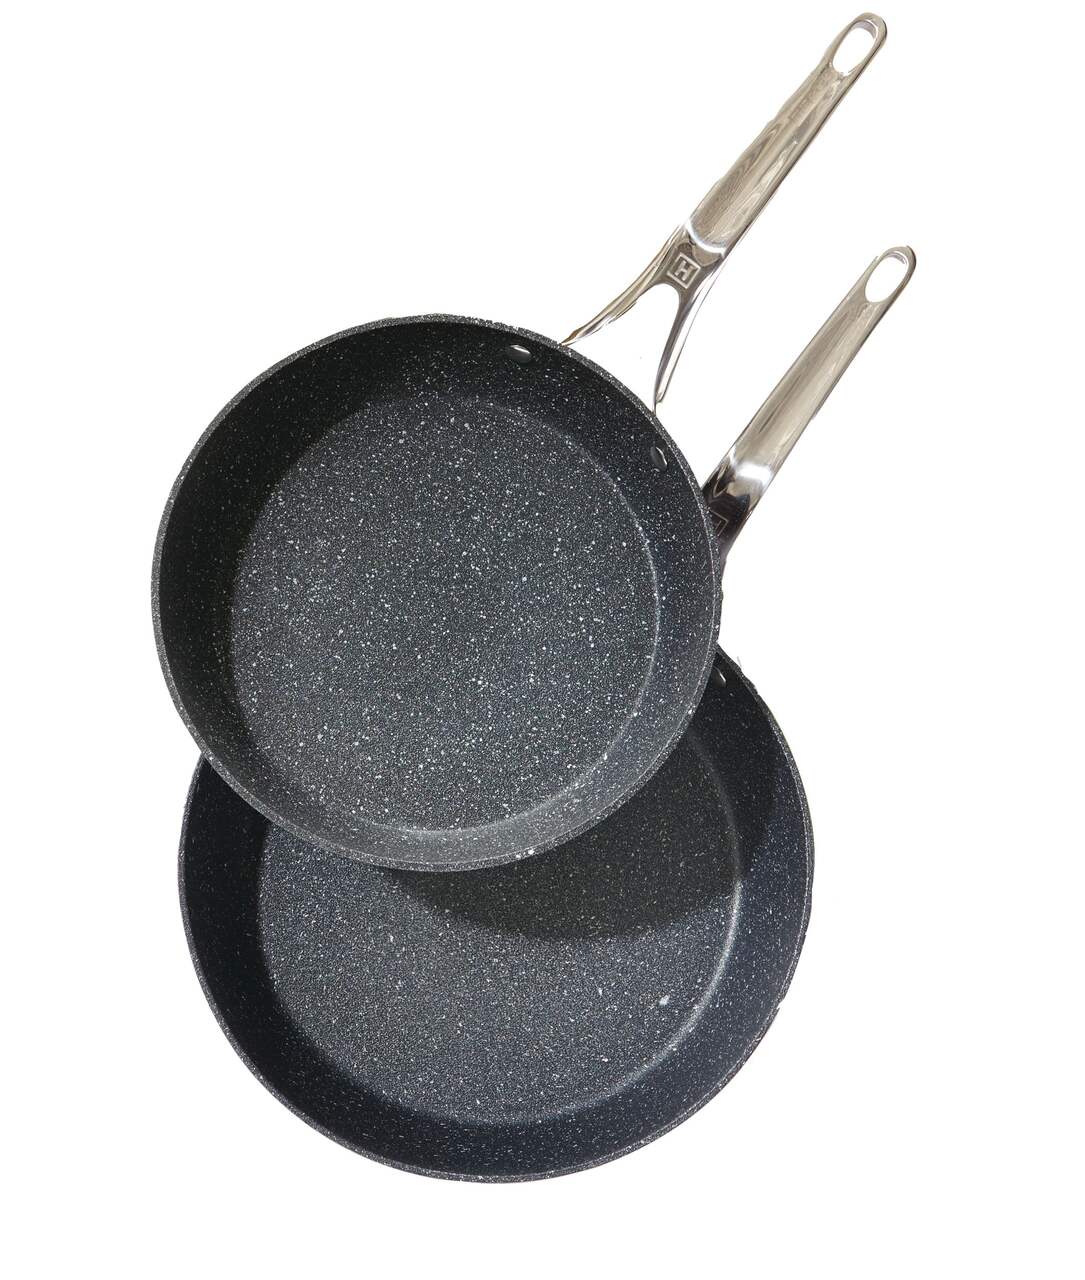  Heritage 'The Rock' 2-Pack Fry Pans, 10 and 12: Home & Kitchen